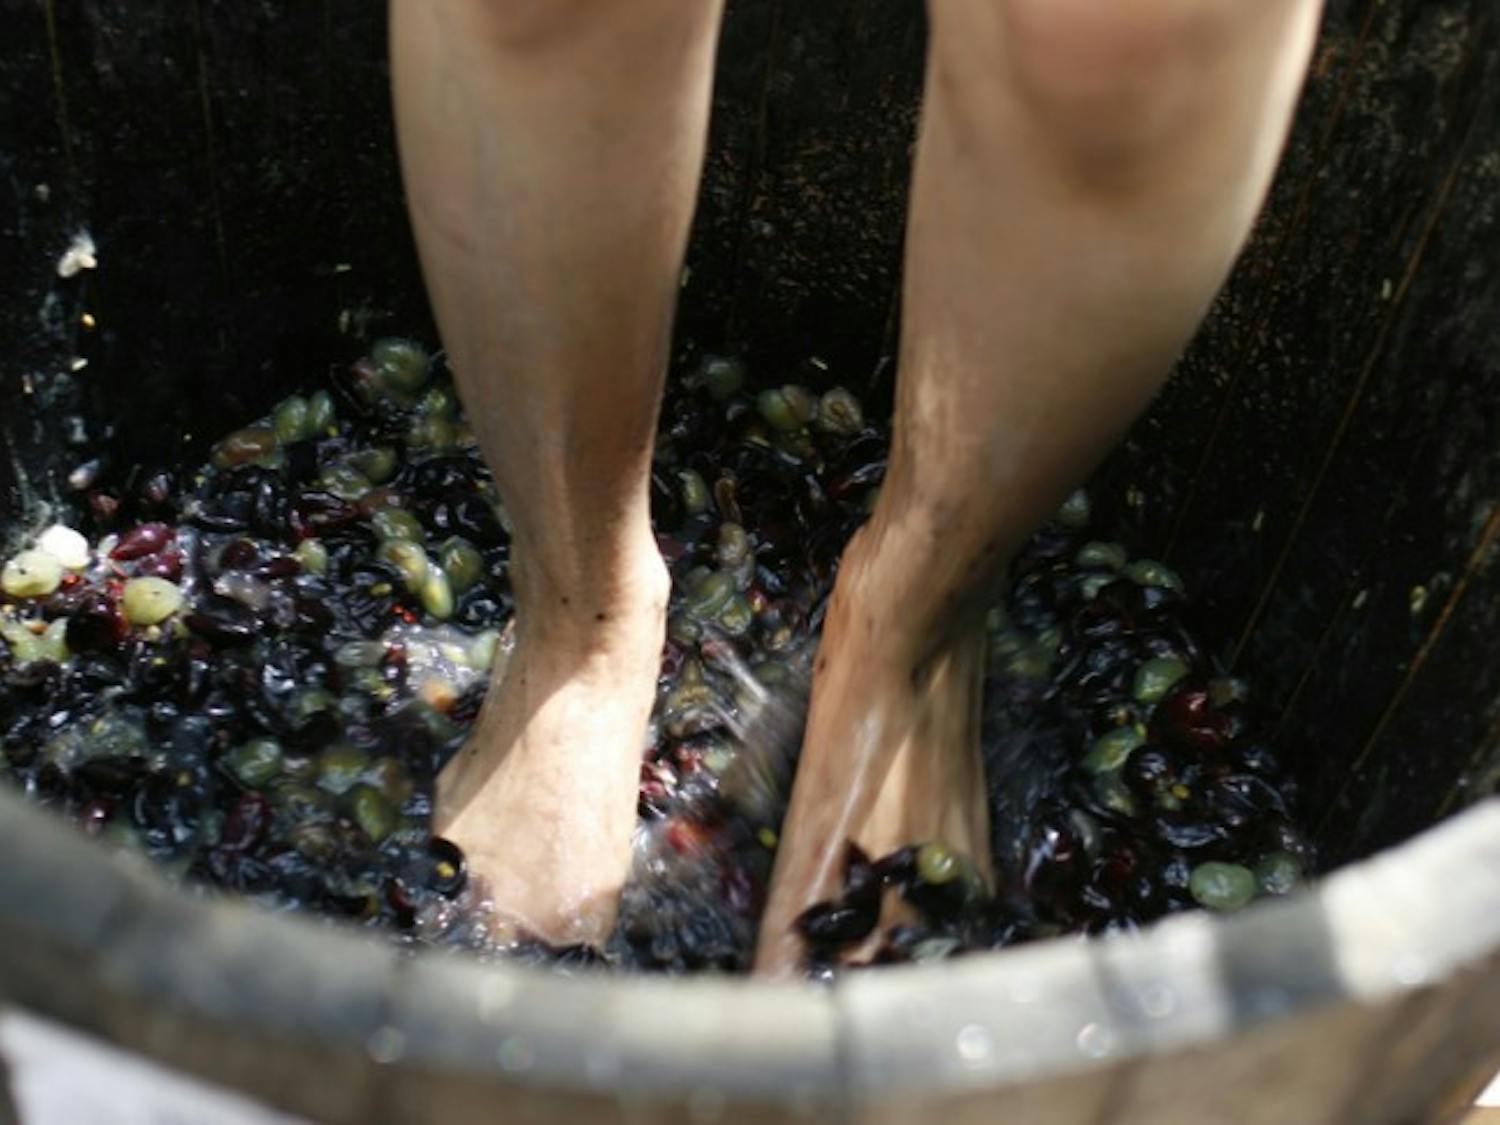 Grapes of Wrath - A Gainesville resident stomps grapes Saturday at Grape Stompin’, a wine-tasting and grape-stomping event. Paulk Vineyards, in Wray, Ga., donated one ton of muscadine grapes, said Gabrielle Fellenz, executive assistant to the director of Gainesville’s Pledge 5 Foundation.